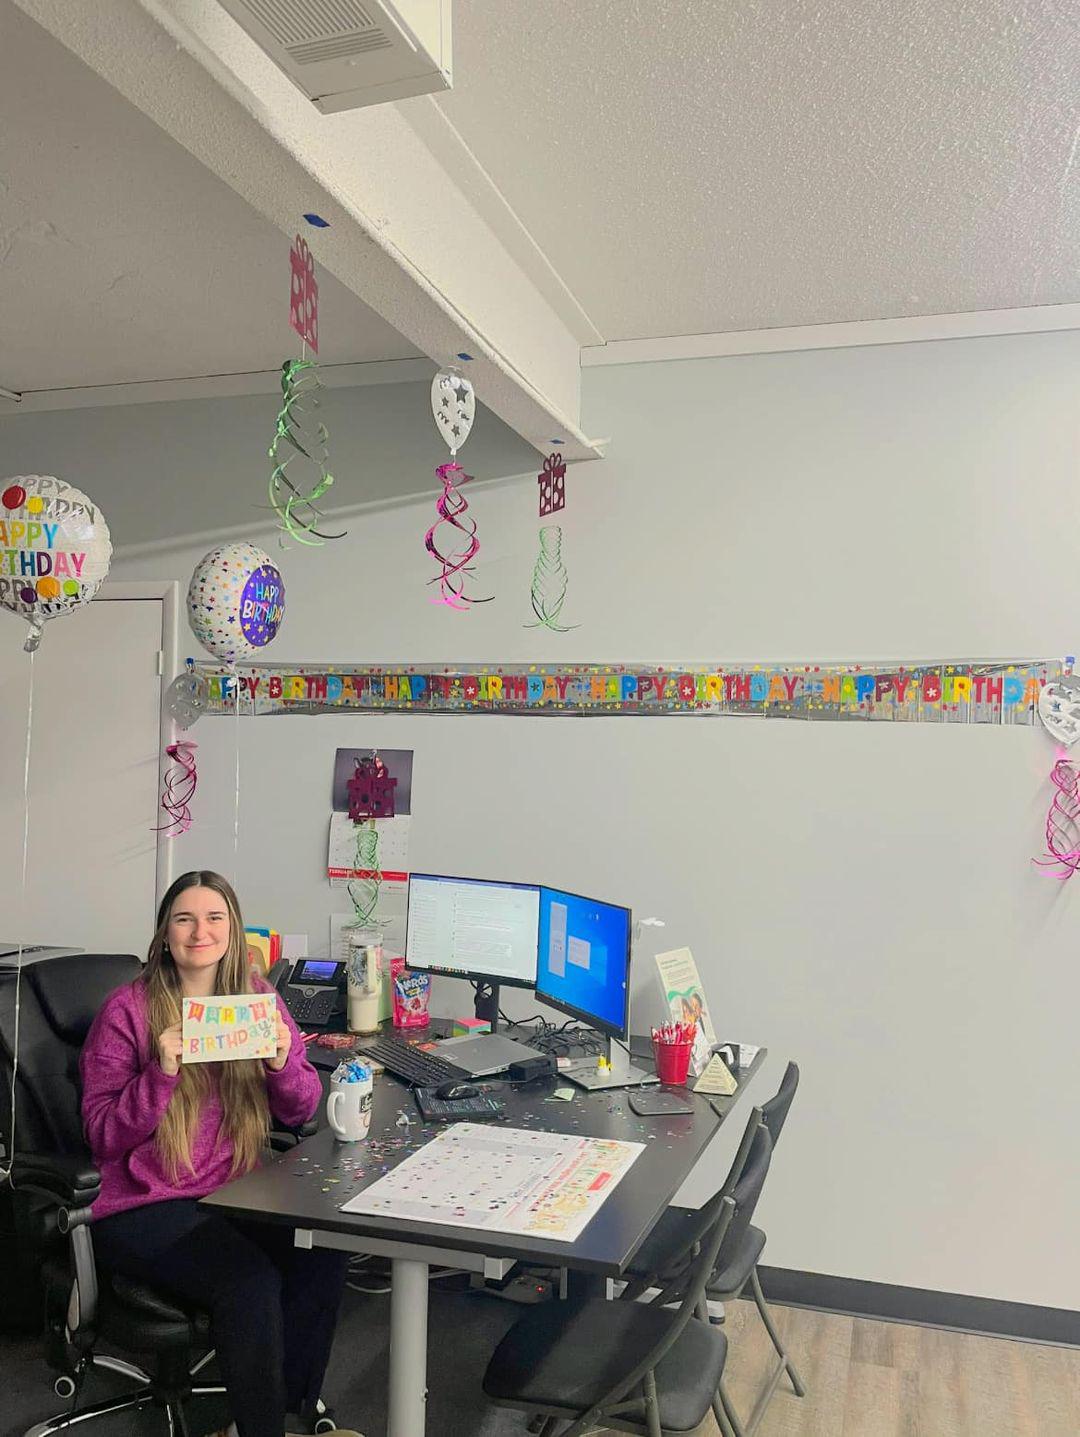 Wishing a very Happy Birthday to Carly! May this year bring you endless joy, success and memorable moments. Cheers to another year of growth and achievement! 🥳🎂🎈